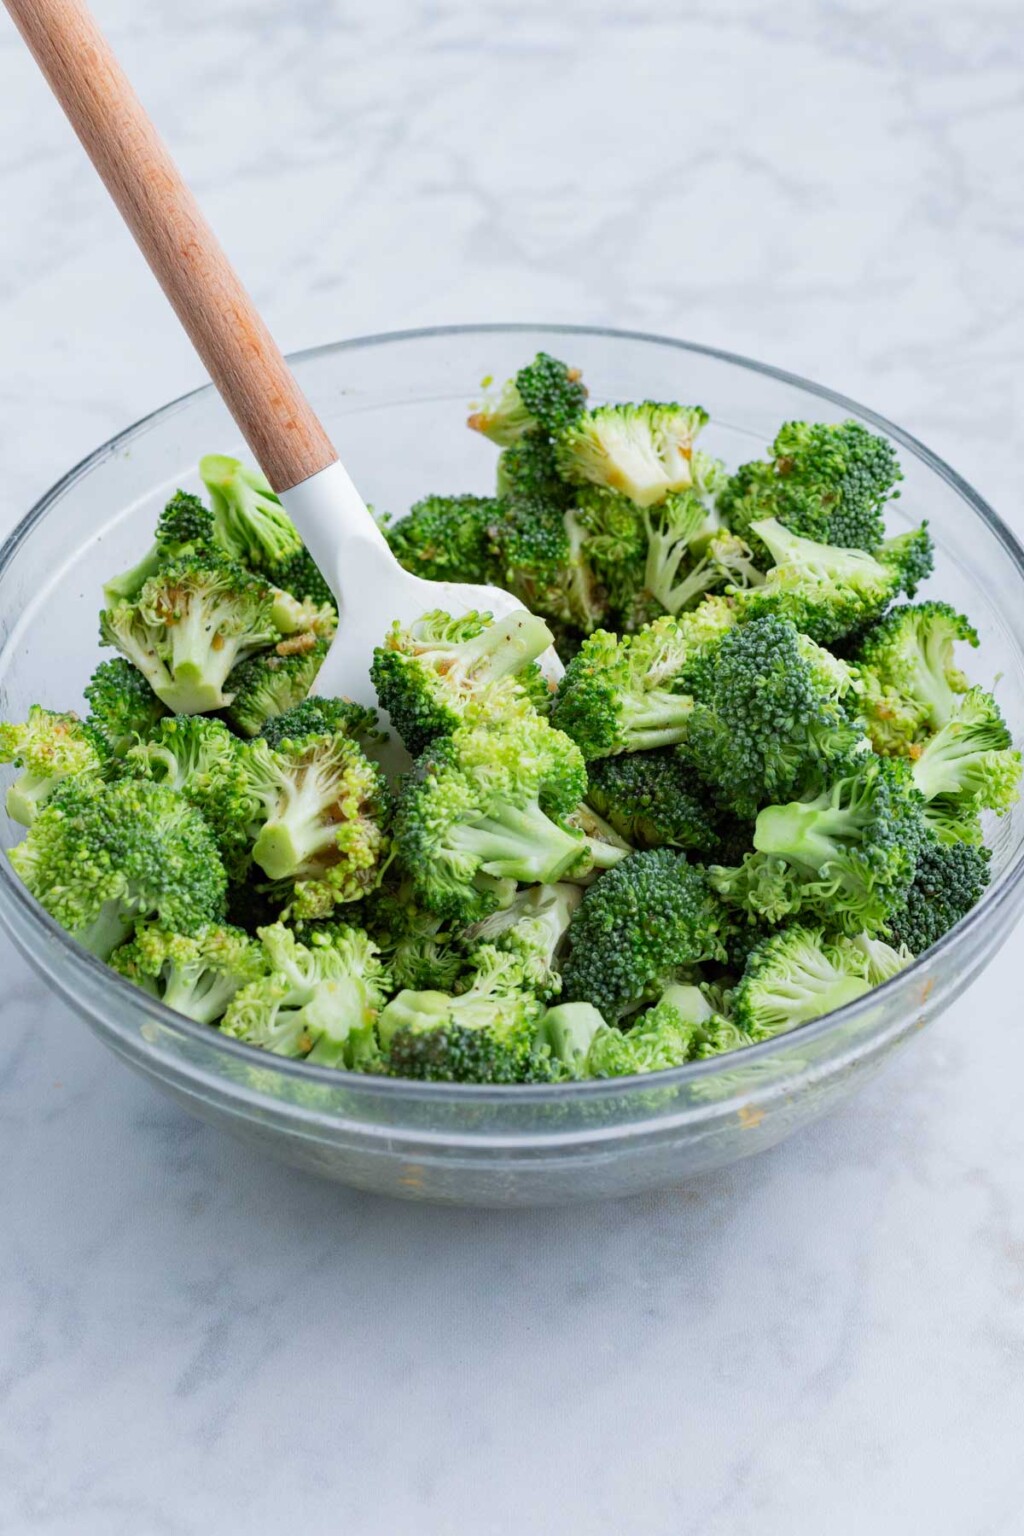 Honey Roasted Broccoli with Garlic - Evolving Table